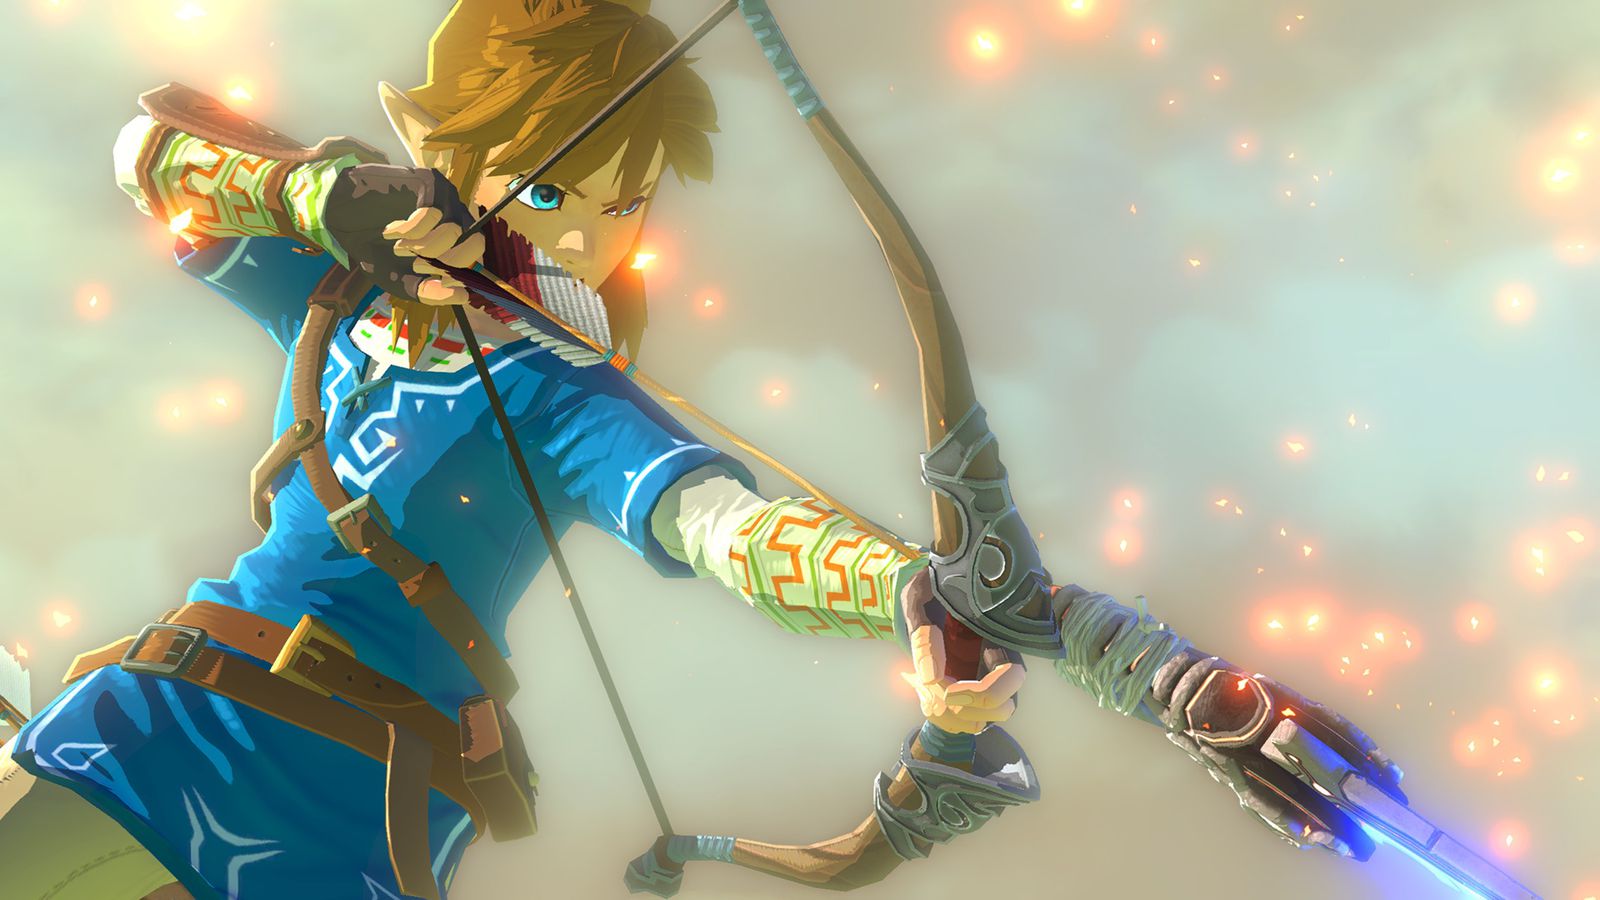 Zelda Breath of the Wild review: an epic masterpiece